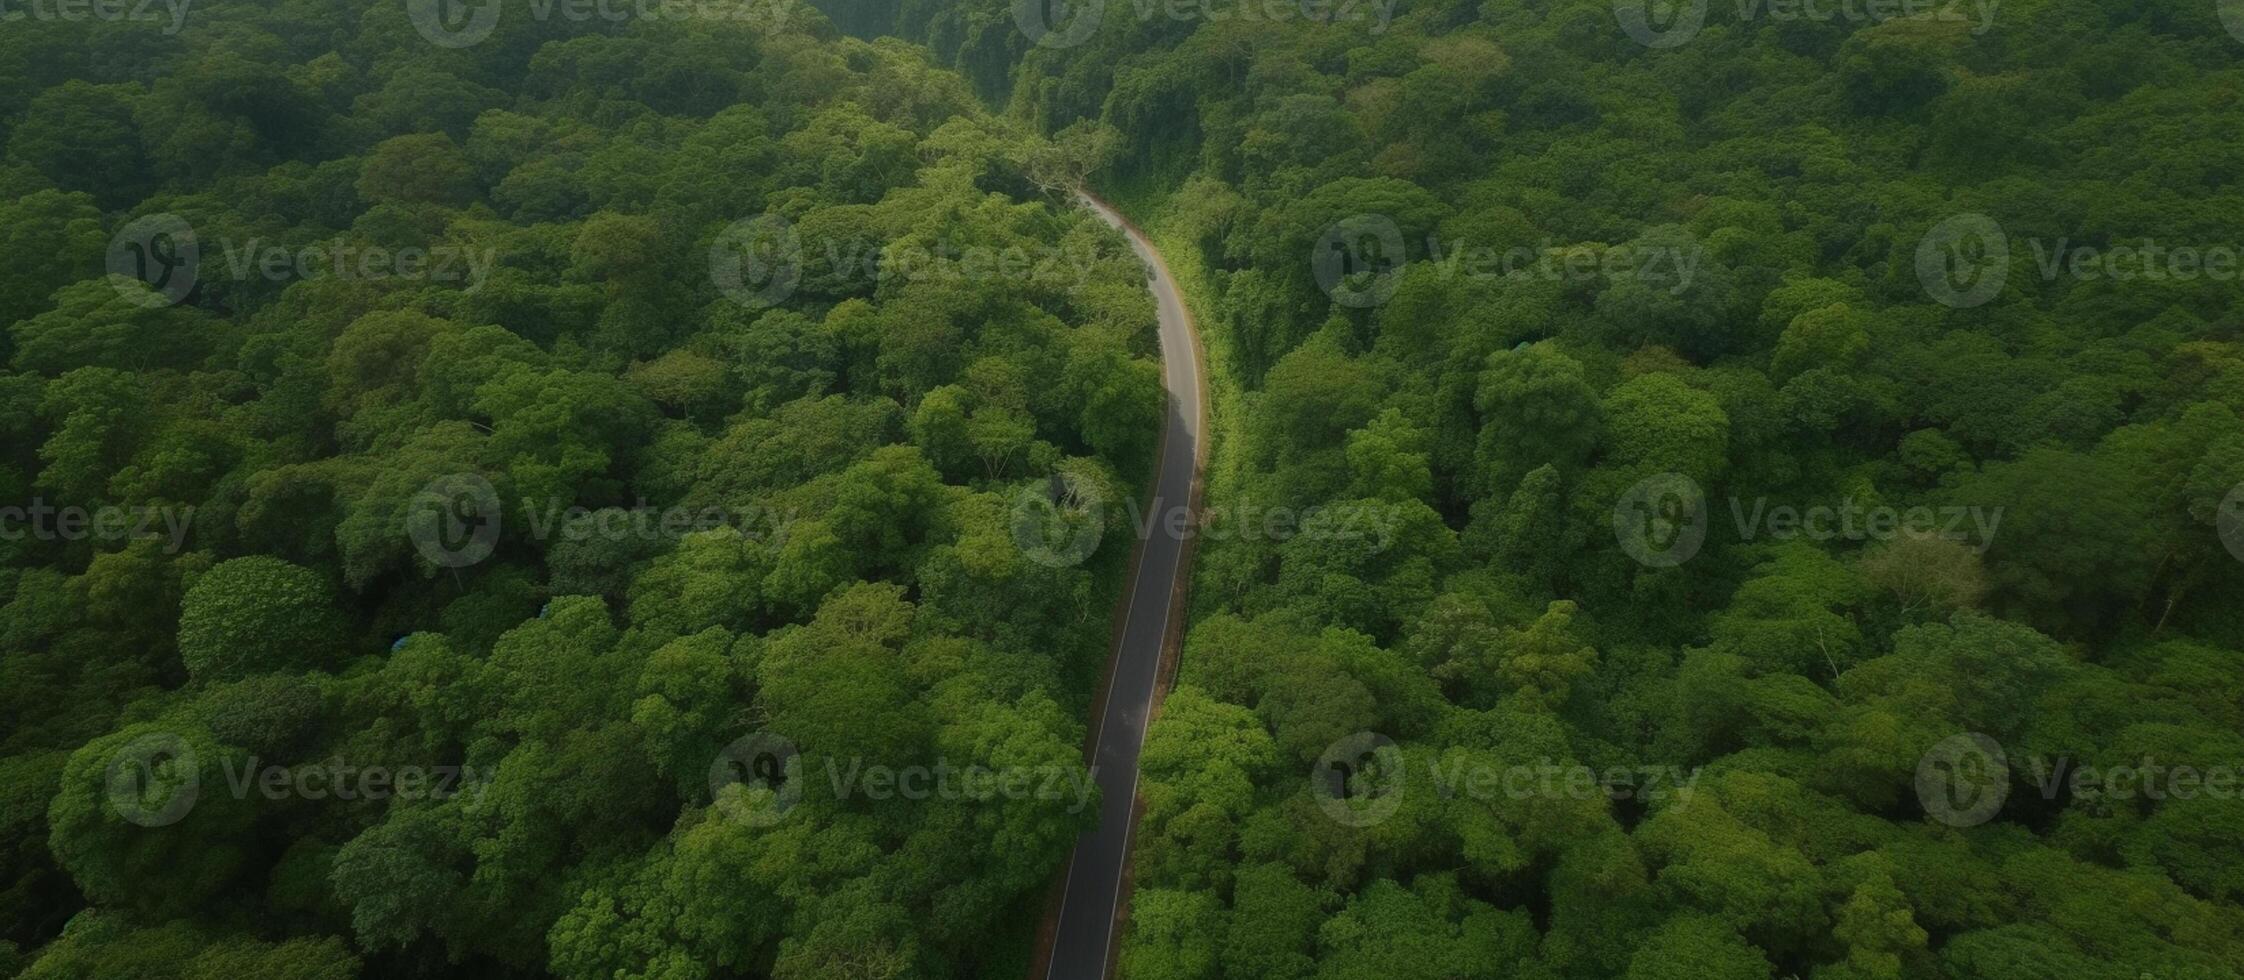 Aerial view of tropical forest with asphalt road cutting through forest, nature background. photo